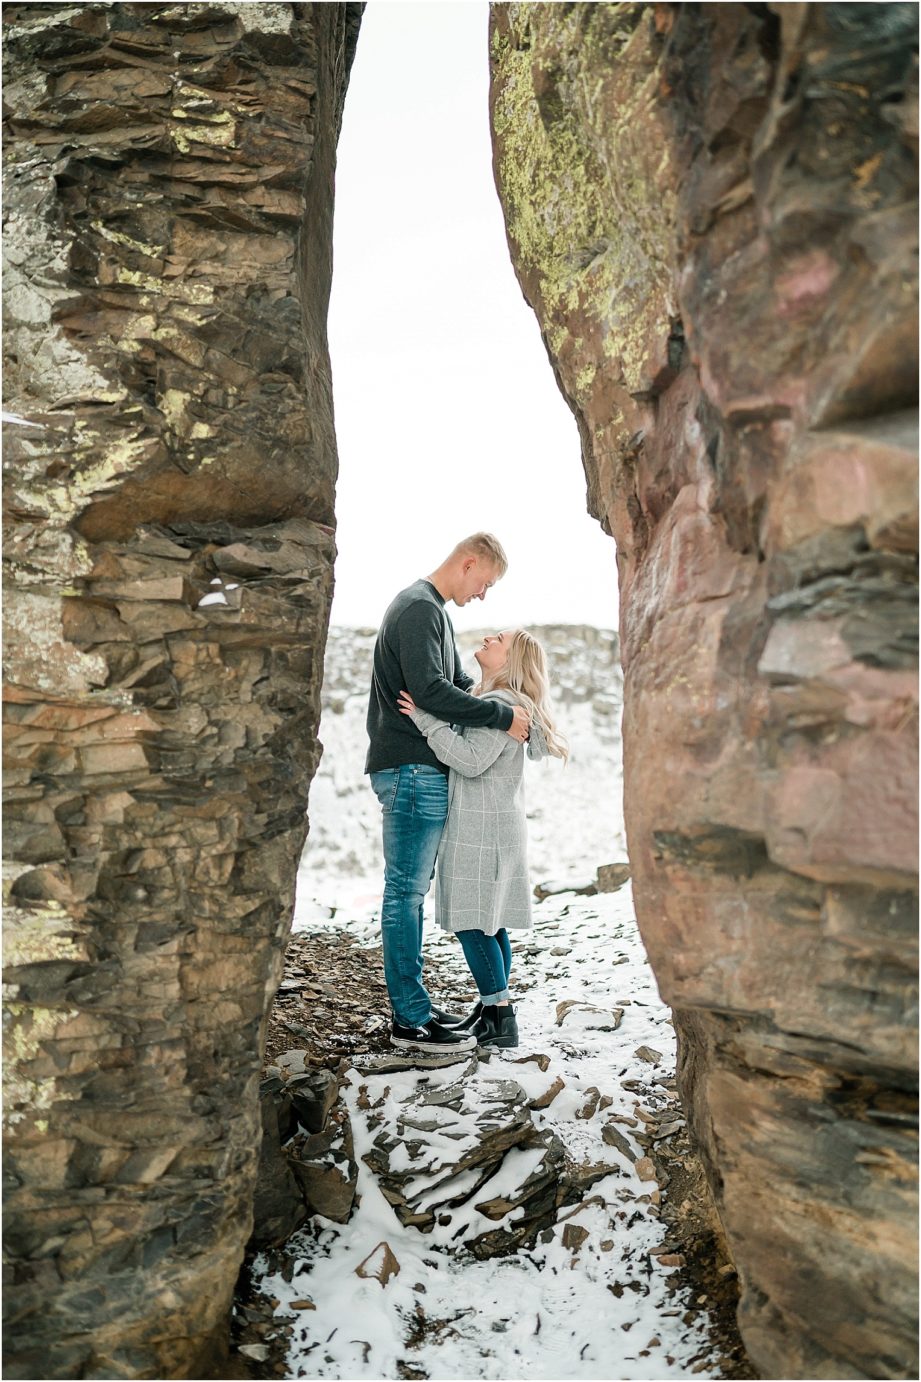 Wintery Desert Engagement Session Vantage Photographer Dakota and Madisyn posed in the crack in the rocks